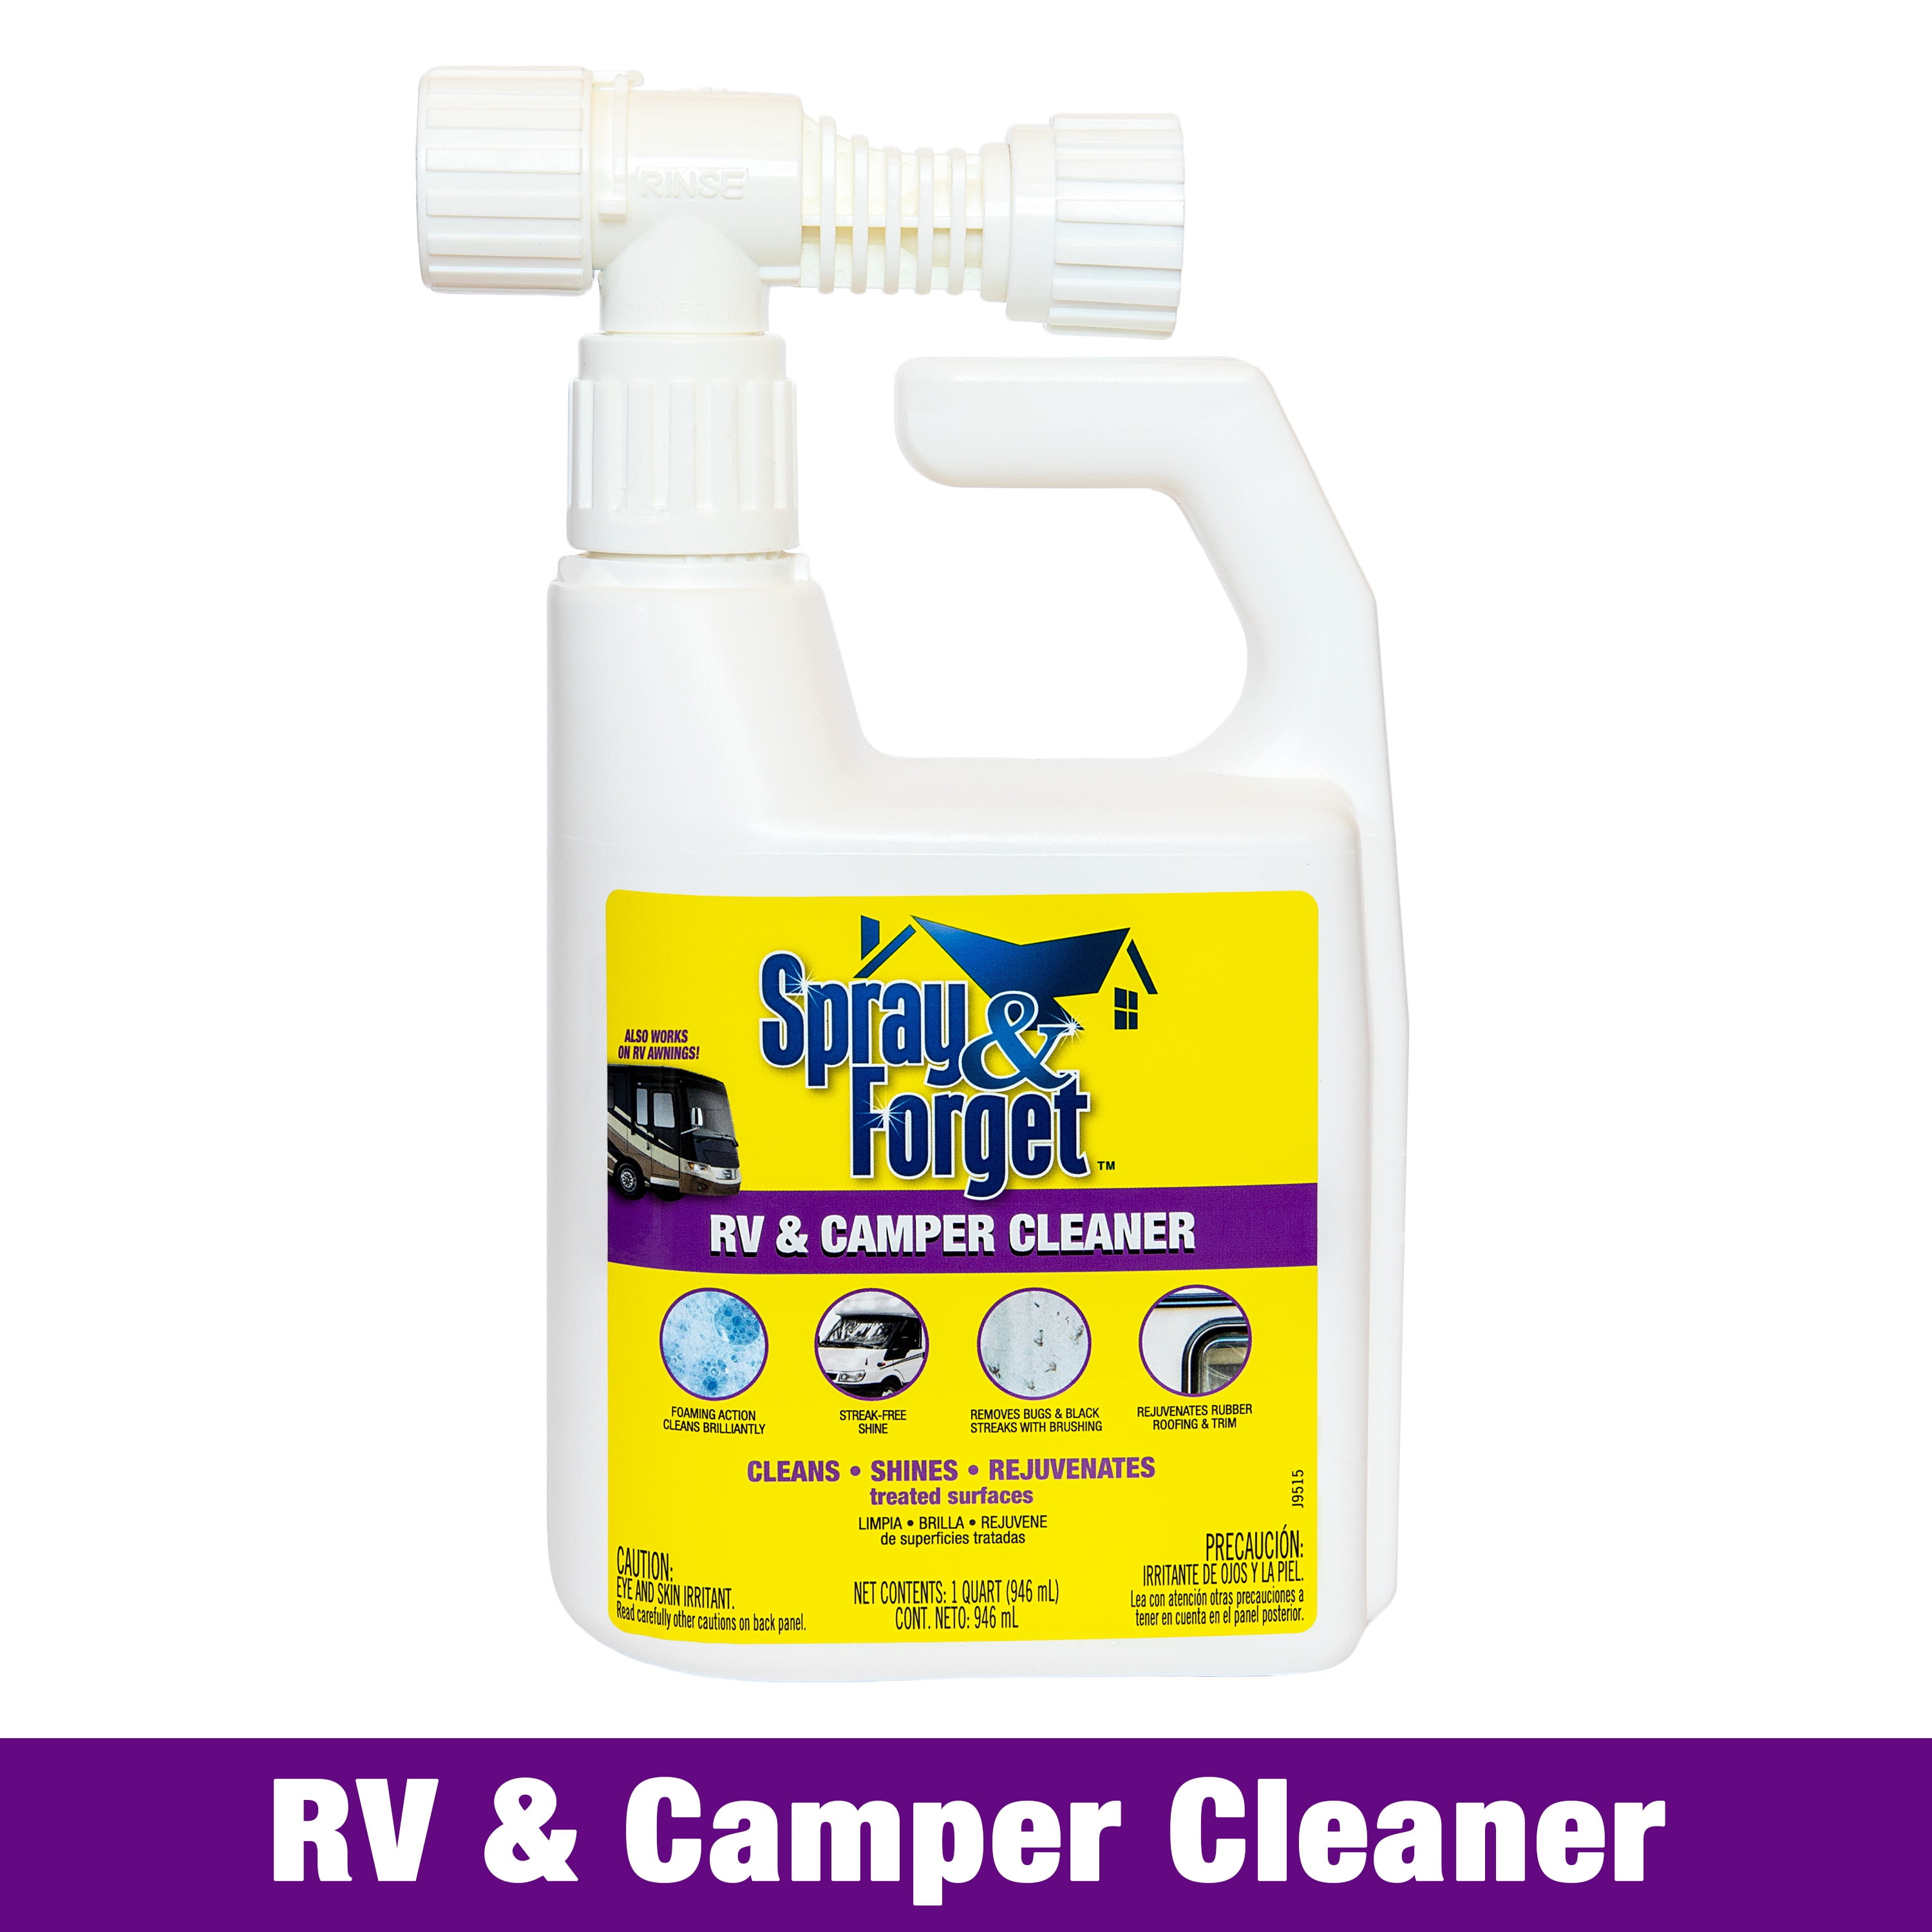 Spray & Forget RV & Camper Cleaner with Hose-End Adapter - 1 Quart Spray And Forget Rv And Camper Cleaner